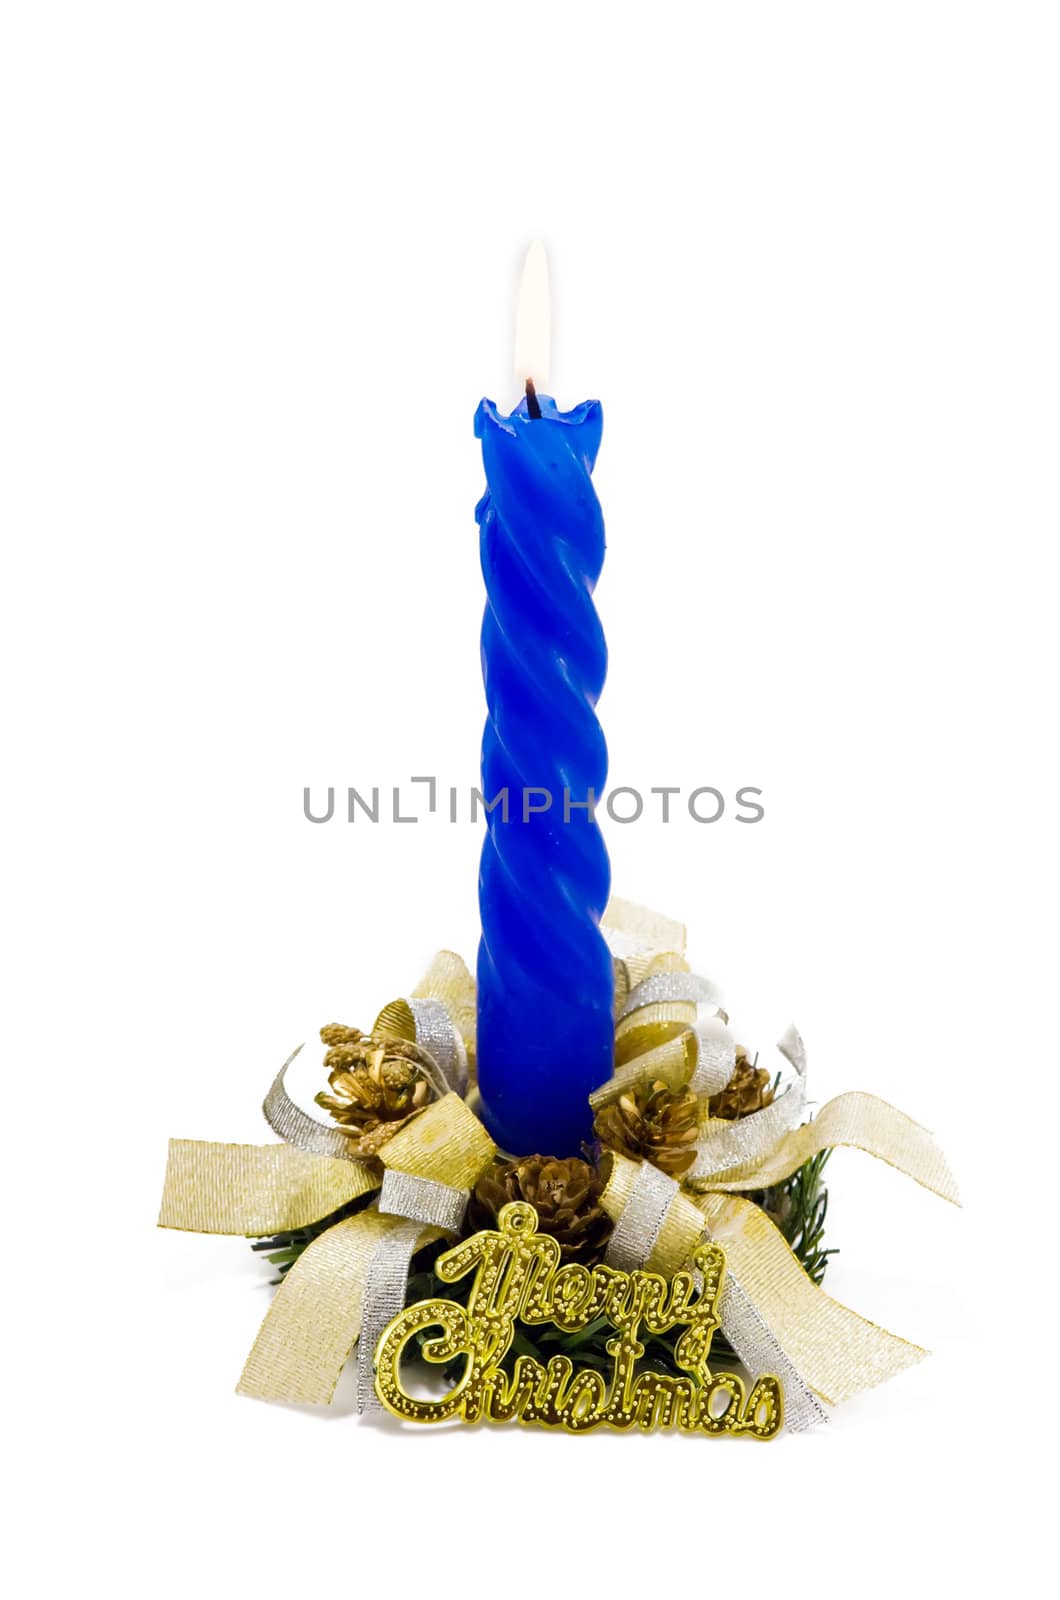 A blue Christmas candle decorated with candlestick and ribbons